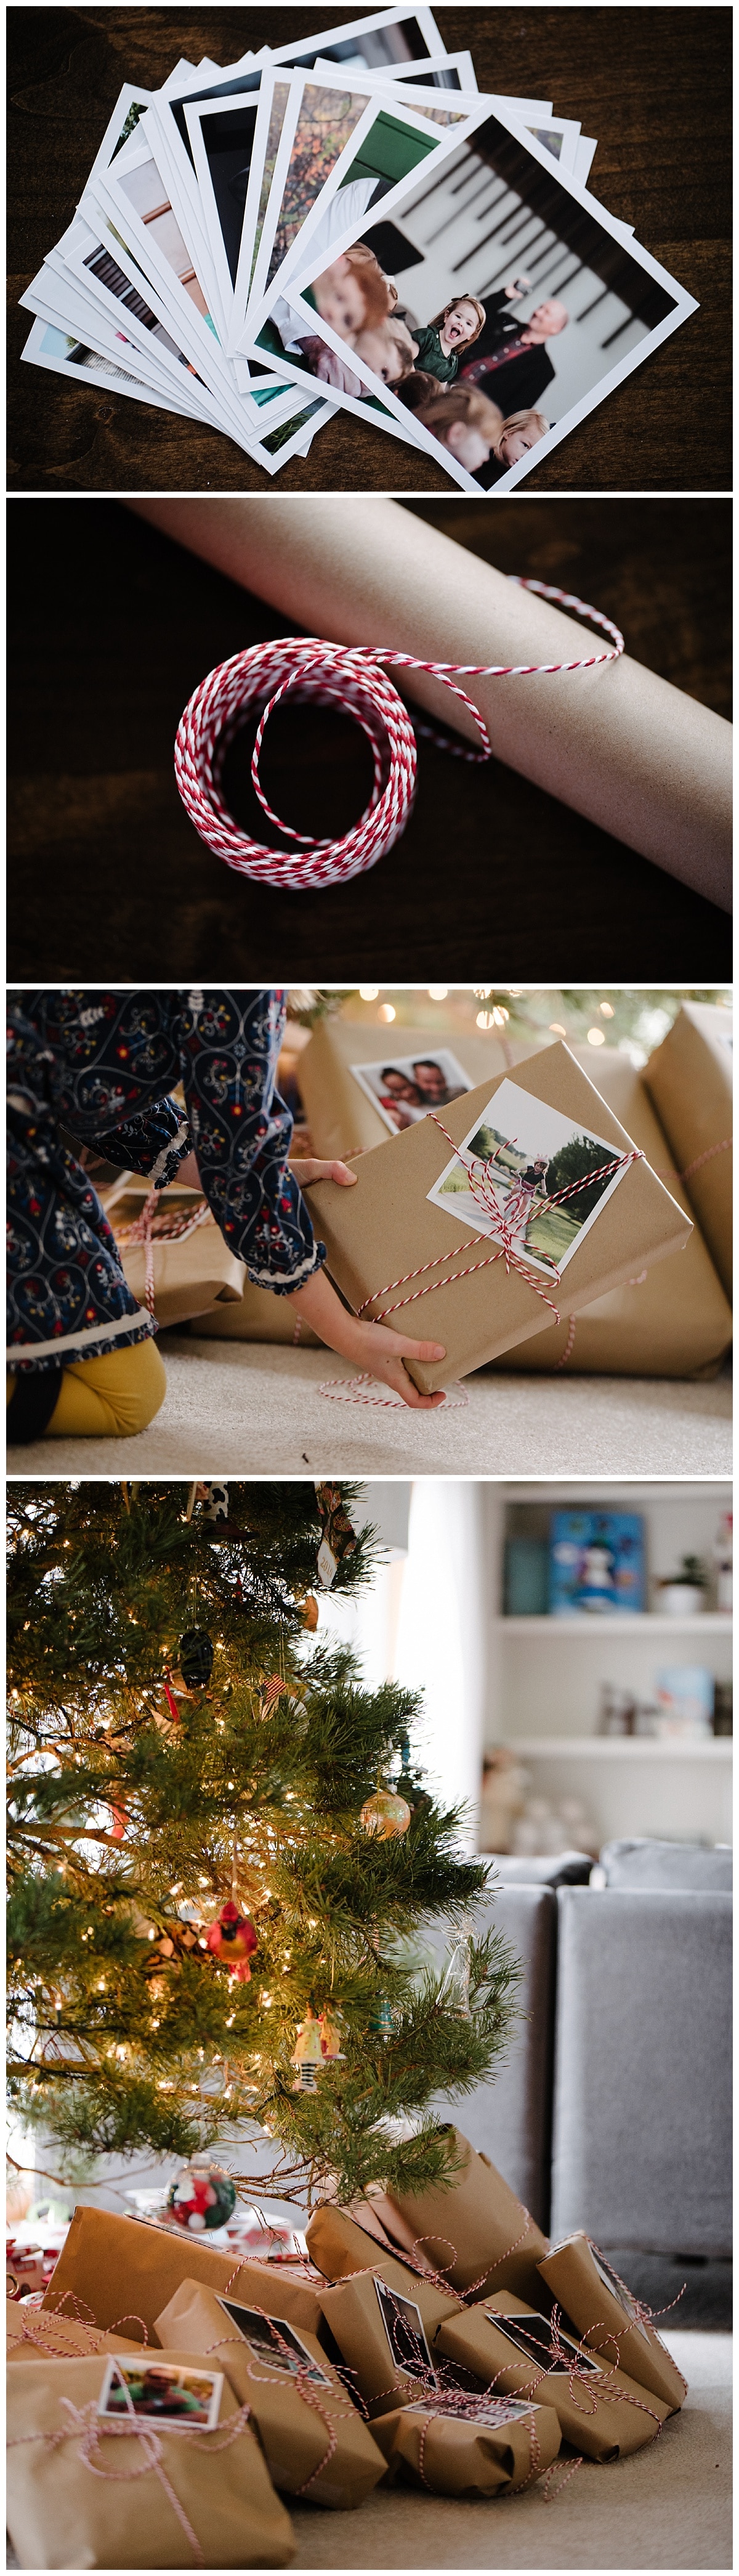 Such a smart way to use photos for your gifts! Love how you can personalize any gift with photos.